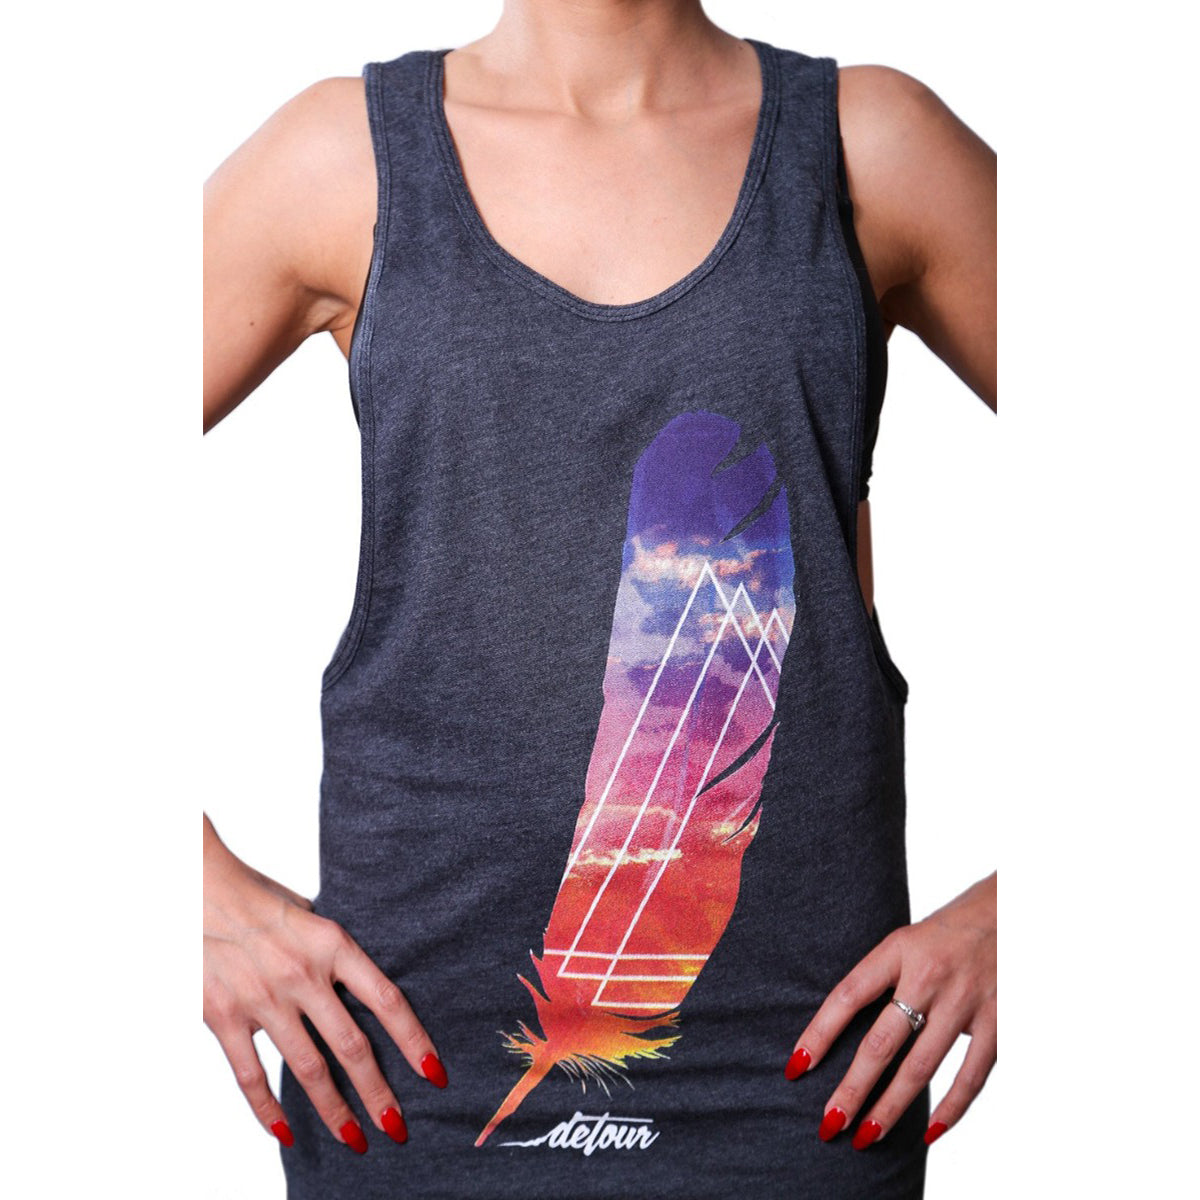 Feather Tank